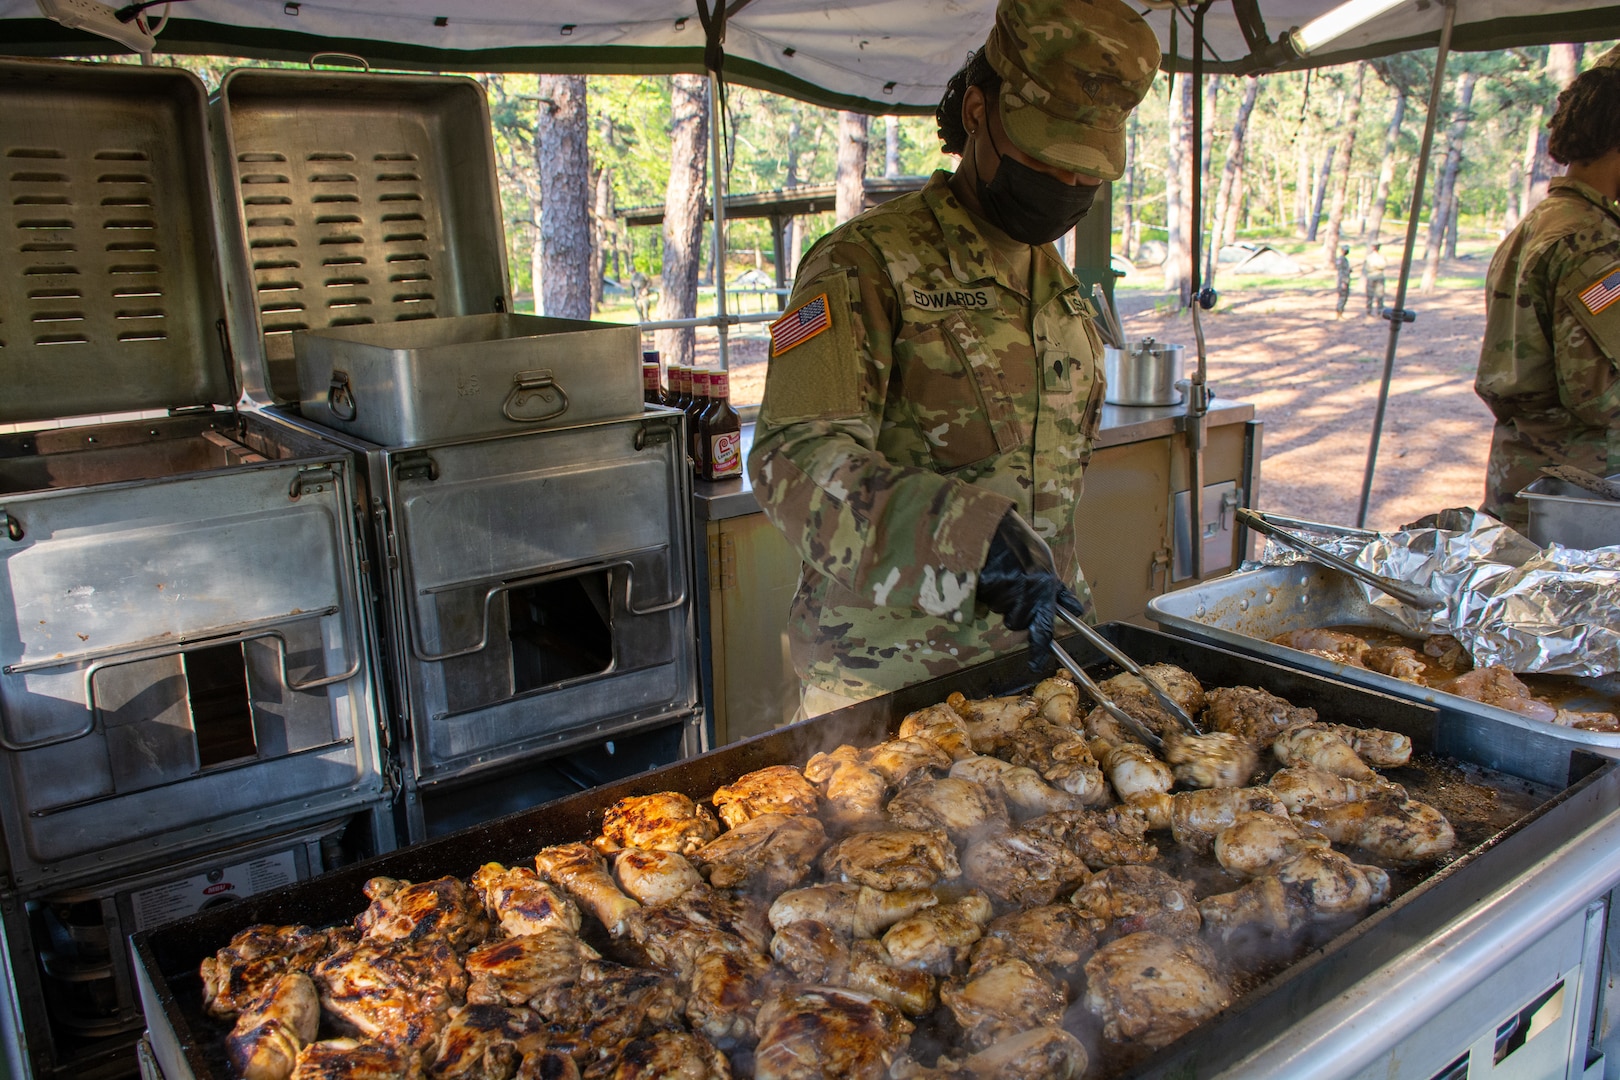 New York Army National Guard Spc. Fatima S. Edwards, assigned to Headquarters and Headquarters Company, 101st Expeditionary Signal Battalion, cooks chicken during training for the next Philip A. Connelly Competition at Joint Base McGuire-Dix-Lakehurst, N.J., May 15, 2021. The competition provides recognition for excellence in the preparation and serving of food in Army troop dining facilities and field kitchens.